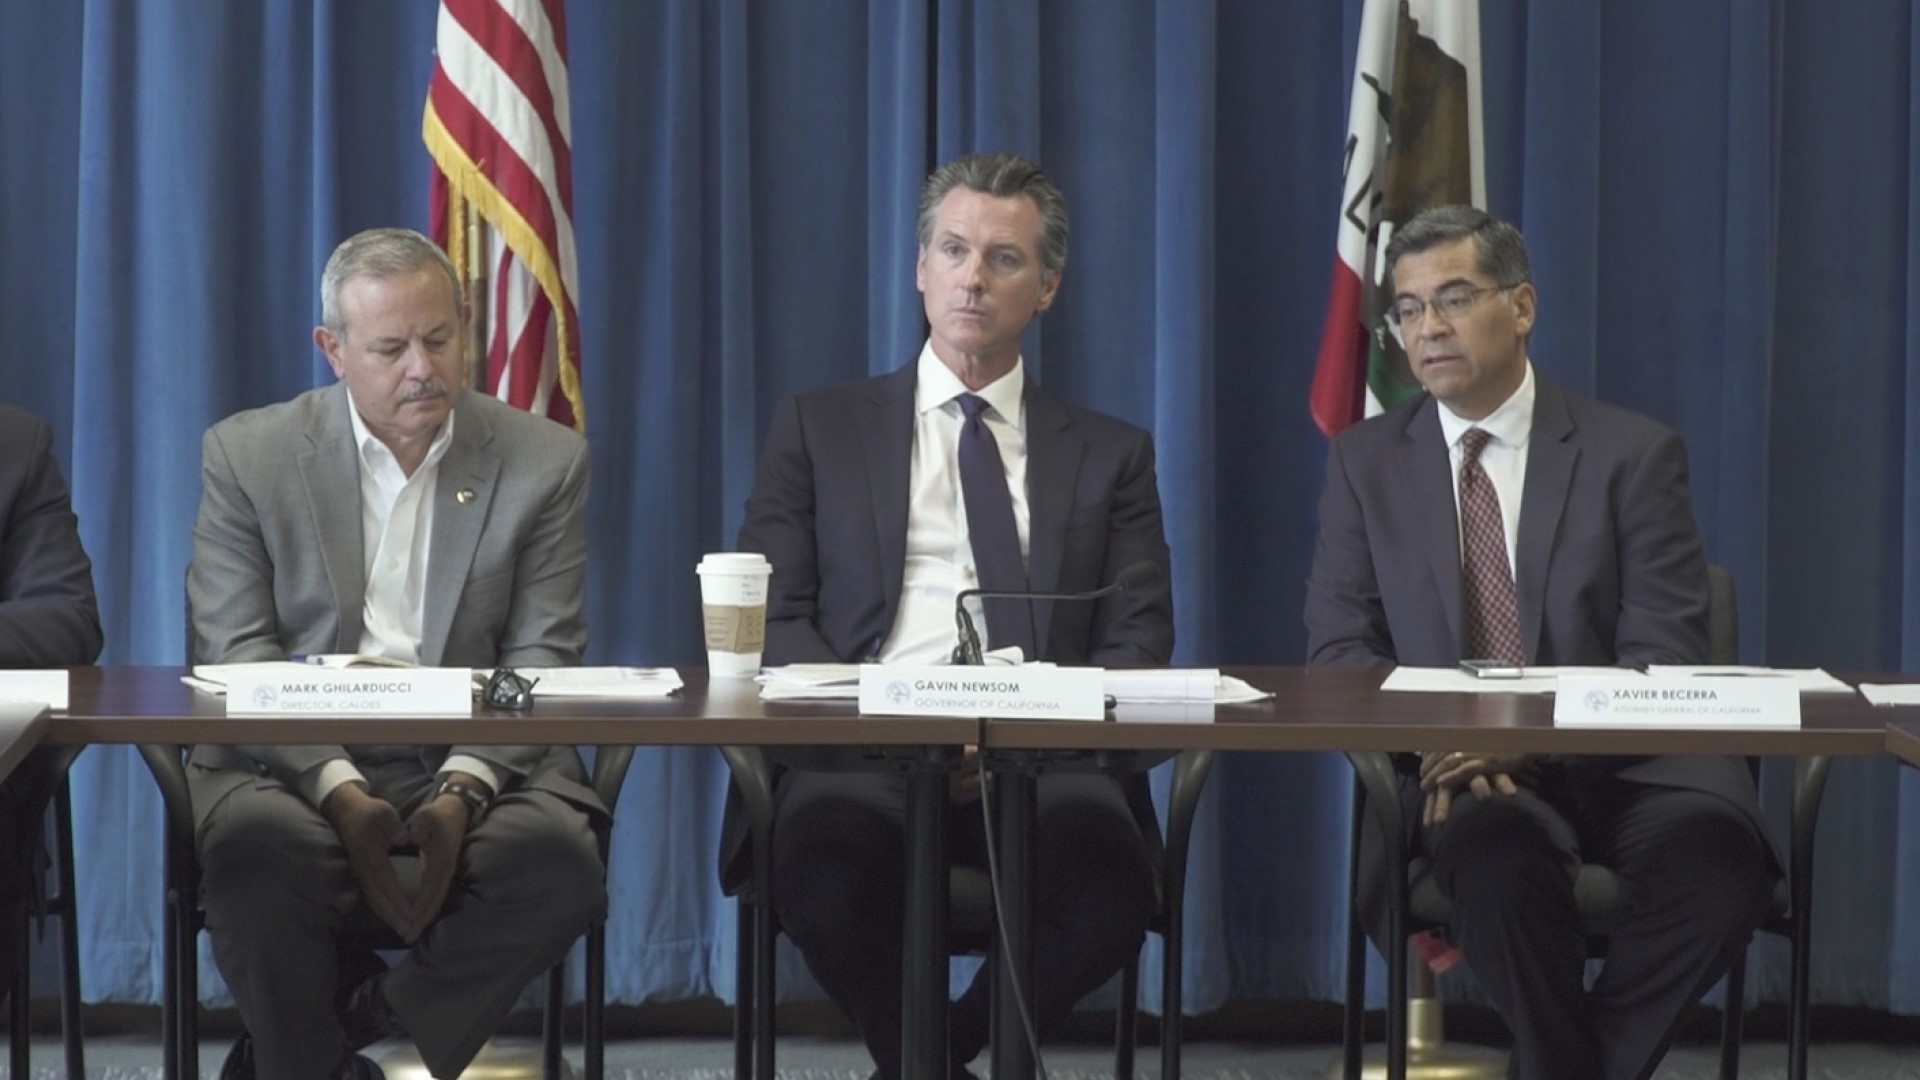 Members of law enforcement, community organizers and politicians came together at a roundtable discussion with Gov. Newsom to address recent gun violence in the U.S.